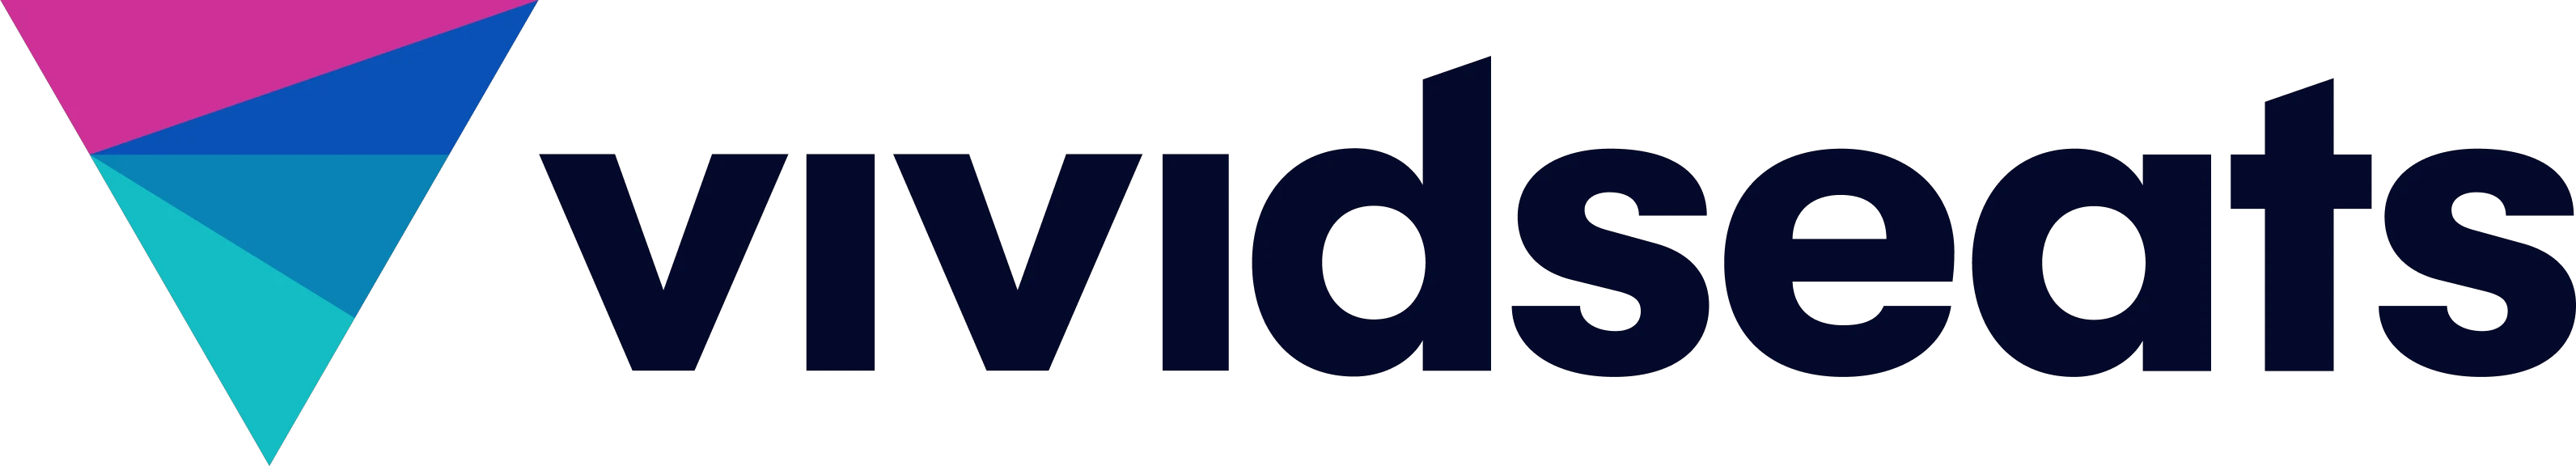 Up To 20% Off Entirewide At Vivid Seats